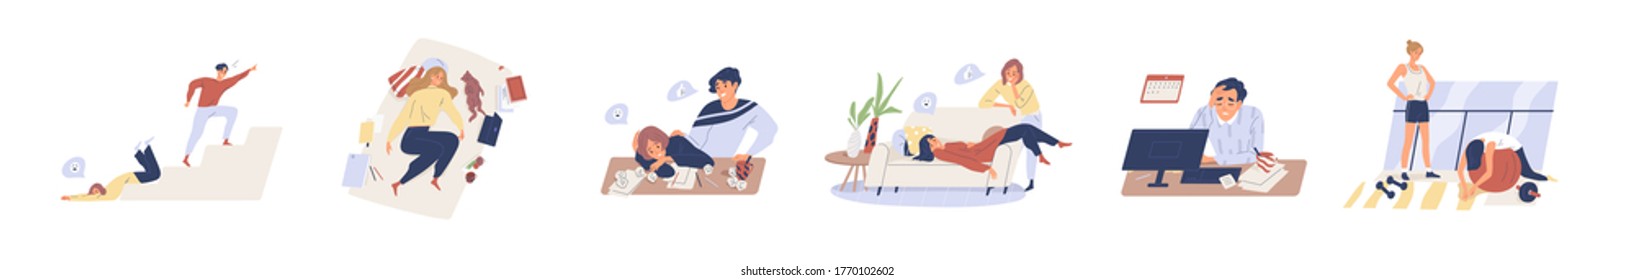 Exhausted, fatigue people in procrastination and emotional burnout on white background. Tired, frustrated, weak, unhappy people do nothing, fall down stairs, laying sofa in flat vector illustration